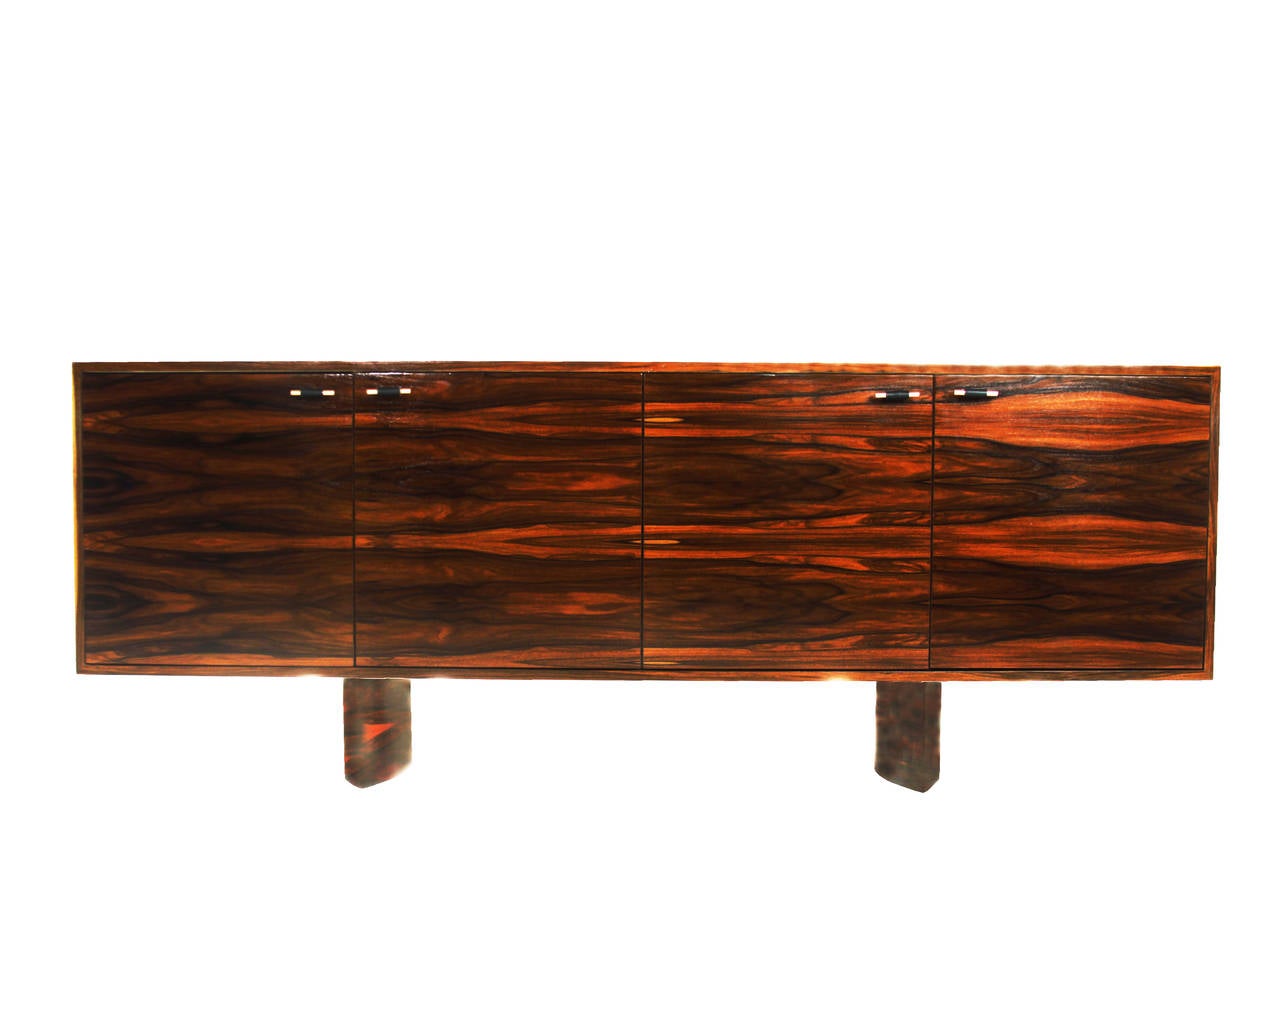 A stunning custom Rosewood credenza by Thomas Hayes Studio with knife edge pedestal legs and pulls made from leather pierced through with polished copper. Pulls are available in brass or copper wrapped in black or natural leather. 

This item is